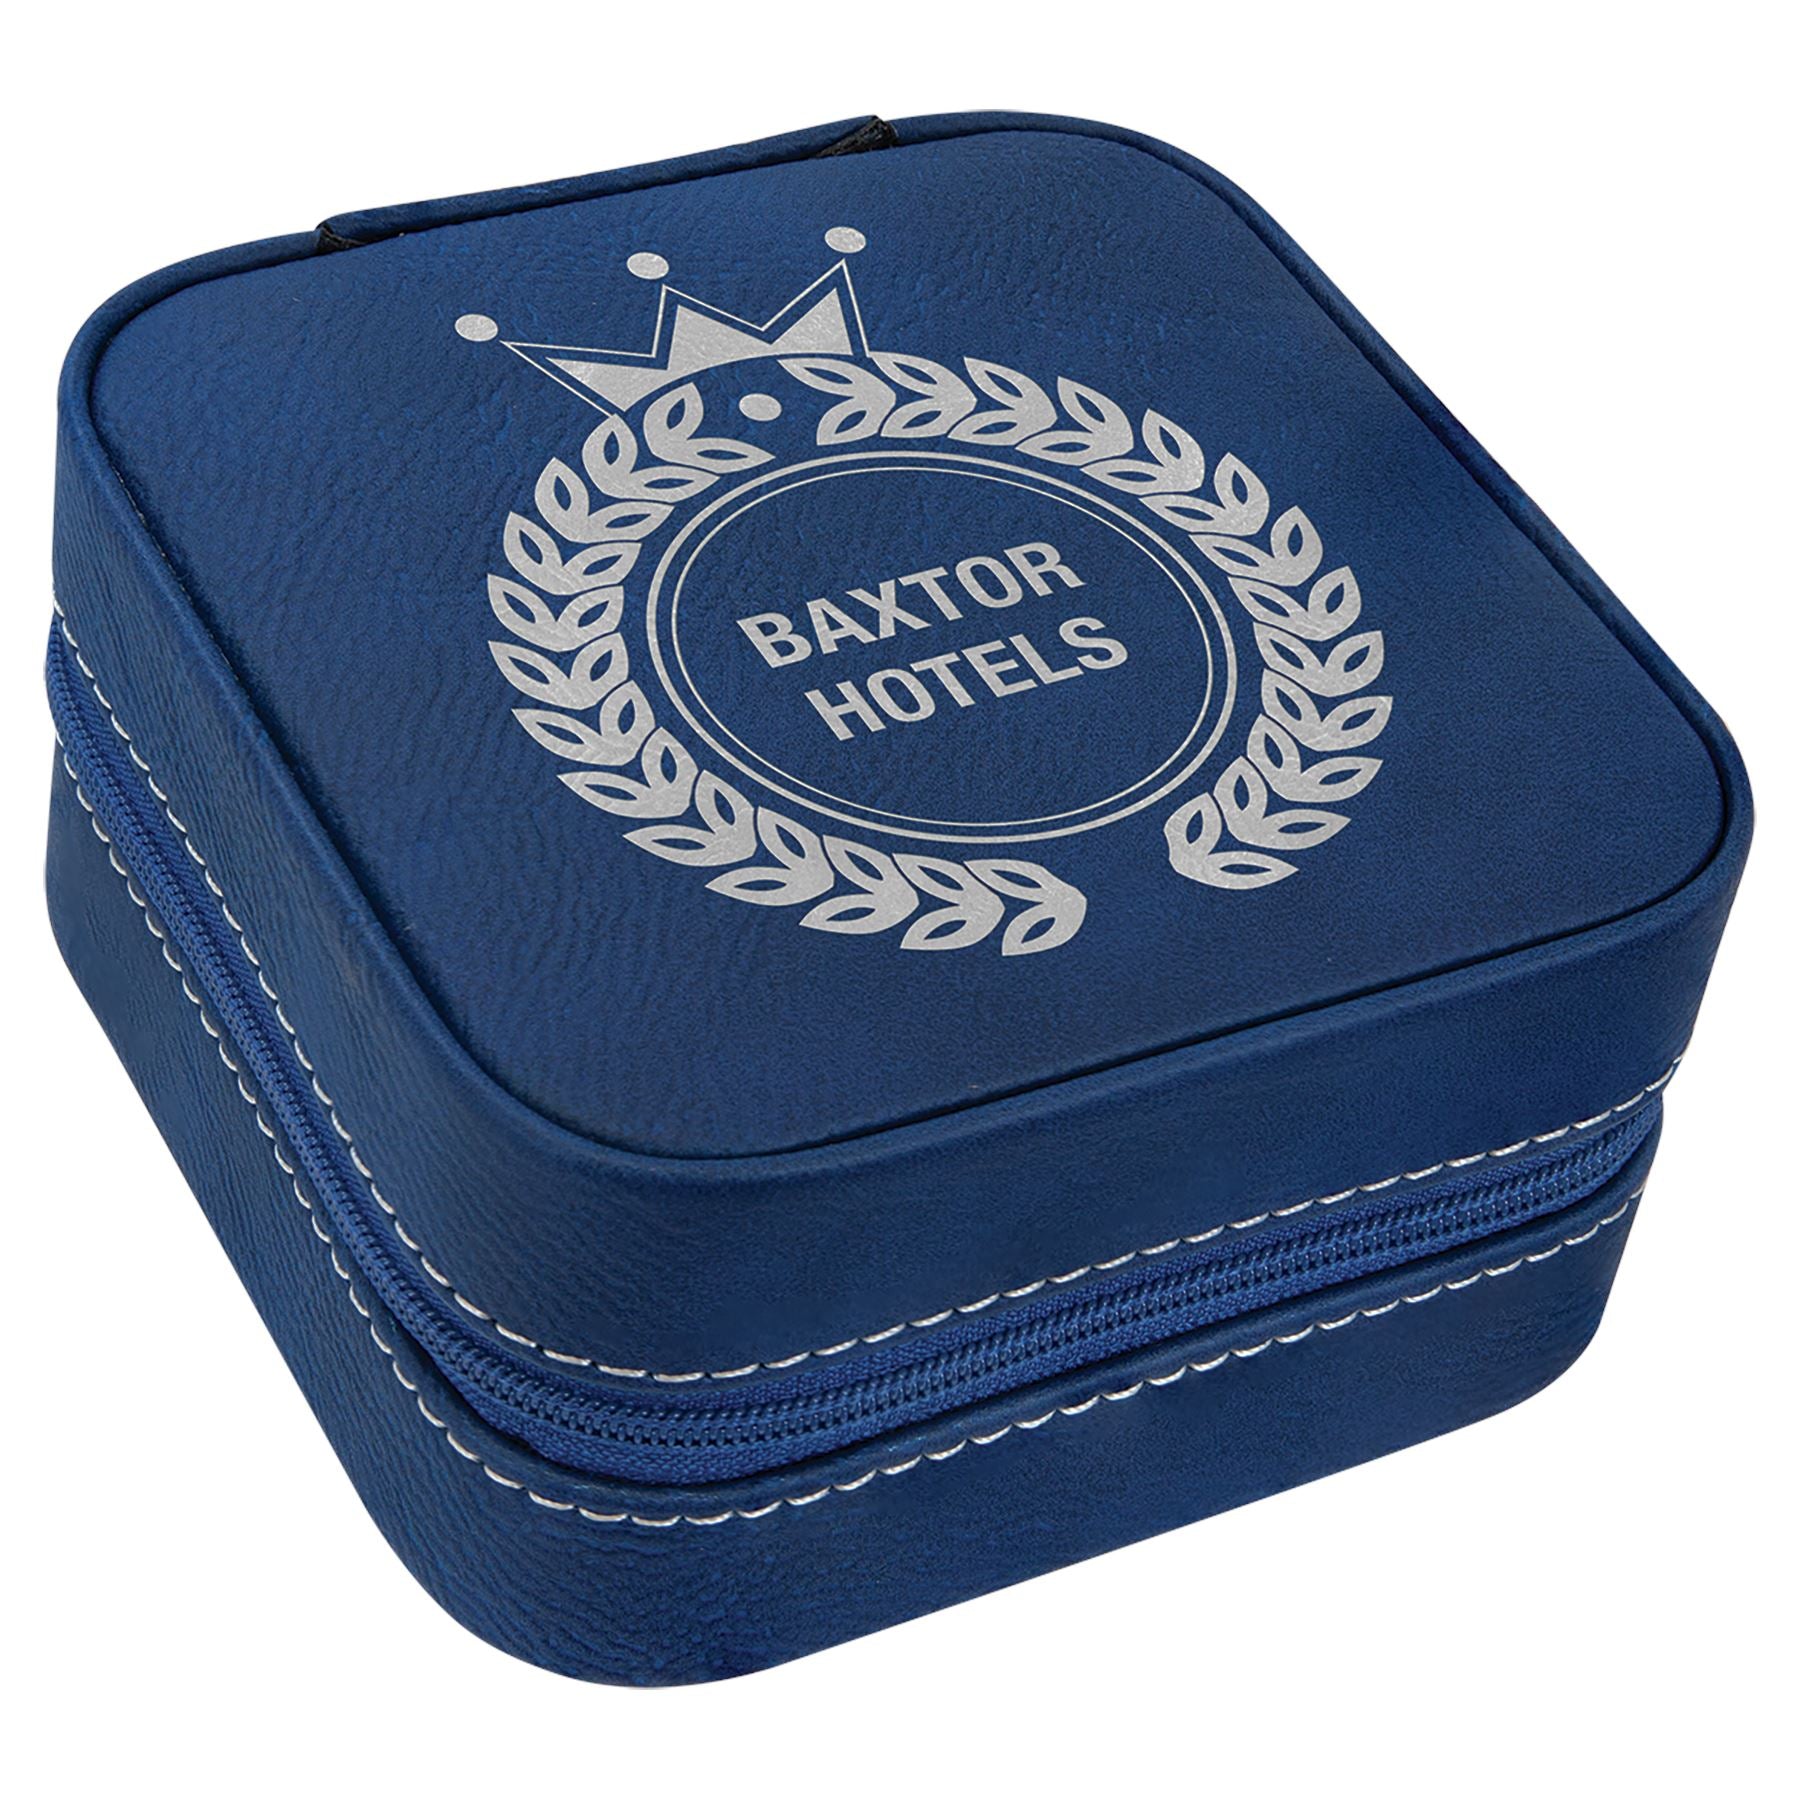 Travel Jewelry Box, Laserable Leatherette, Laser Engraved Jewelry Box Craftworks NW Blue/Silver 